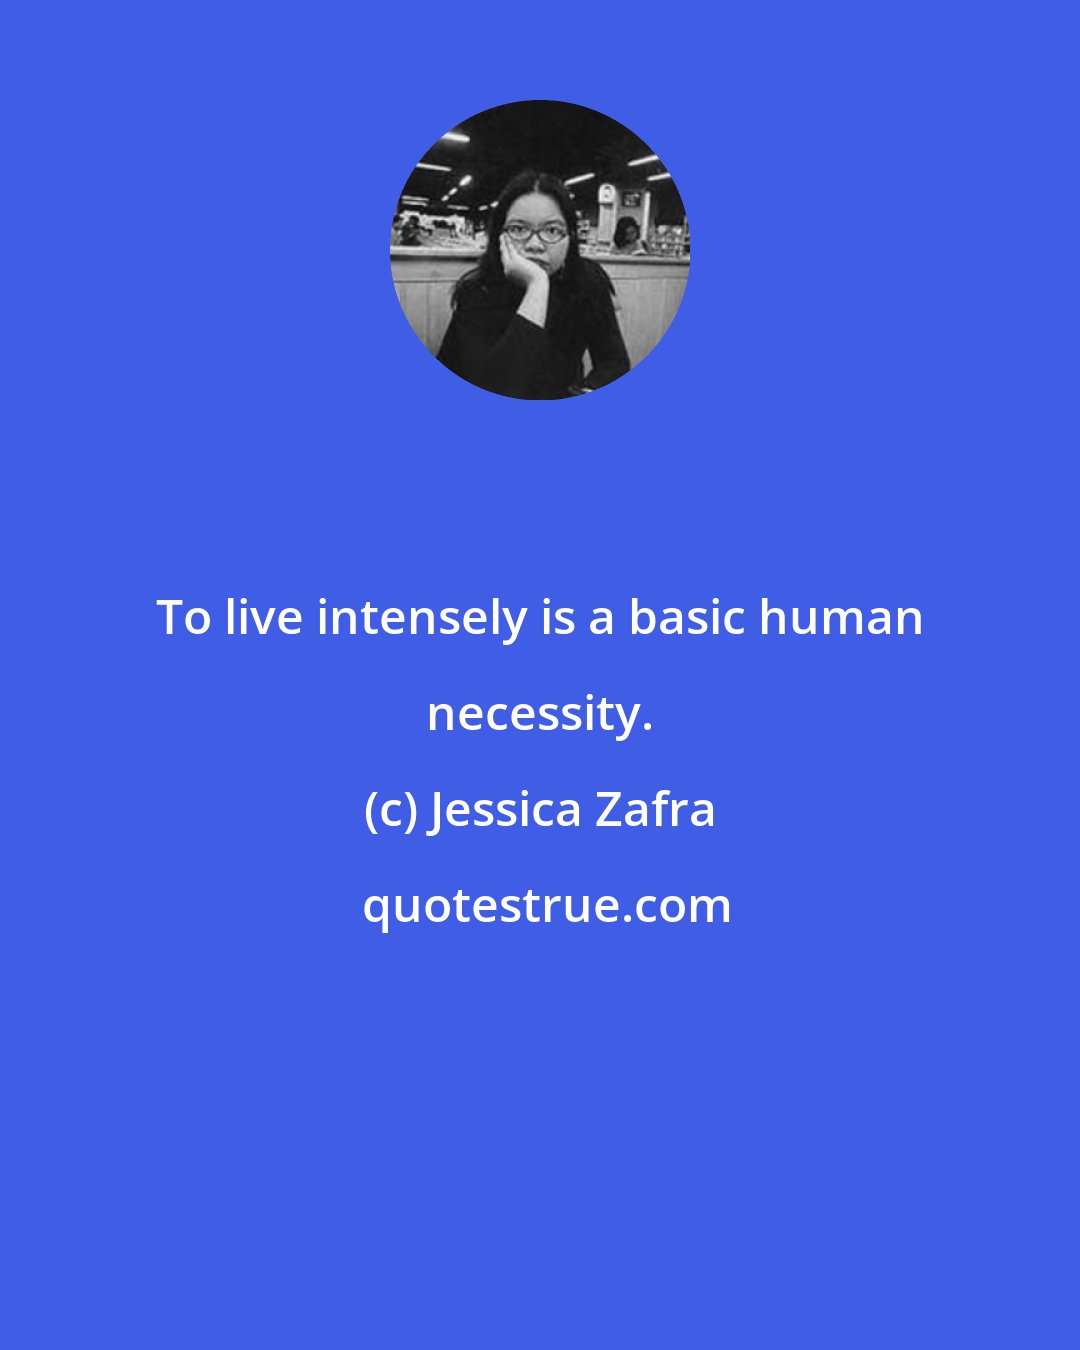 Jessica Zafra: To live intensely is a basic human necessity.